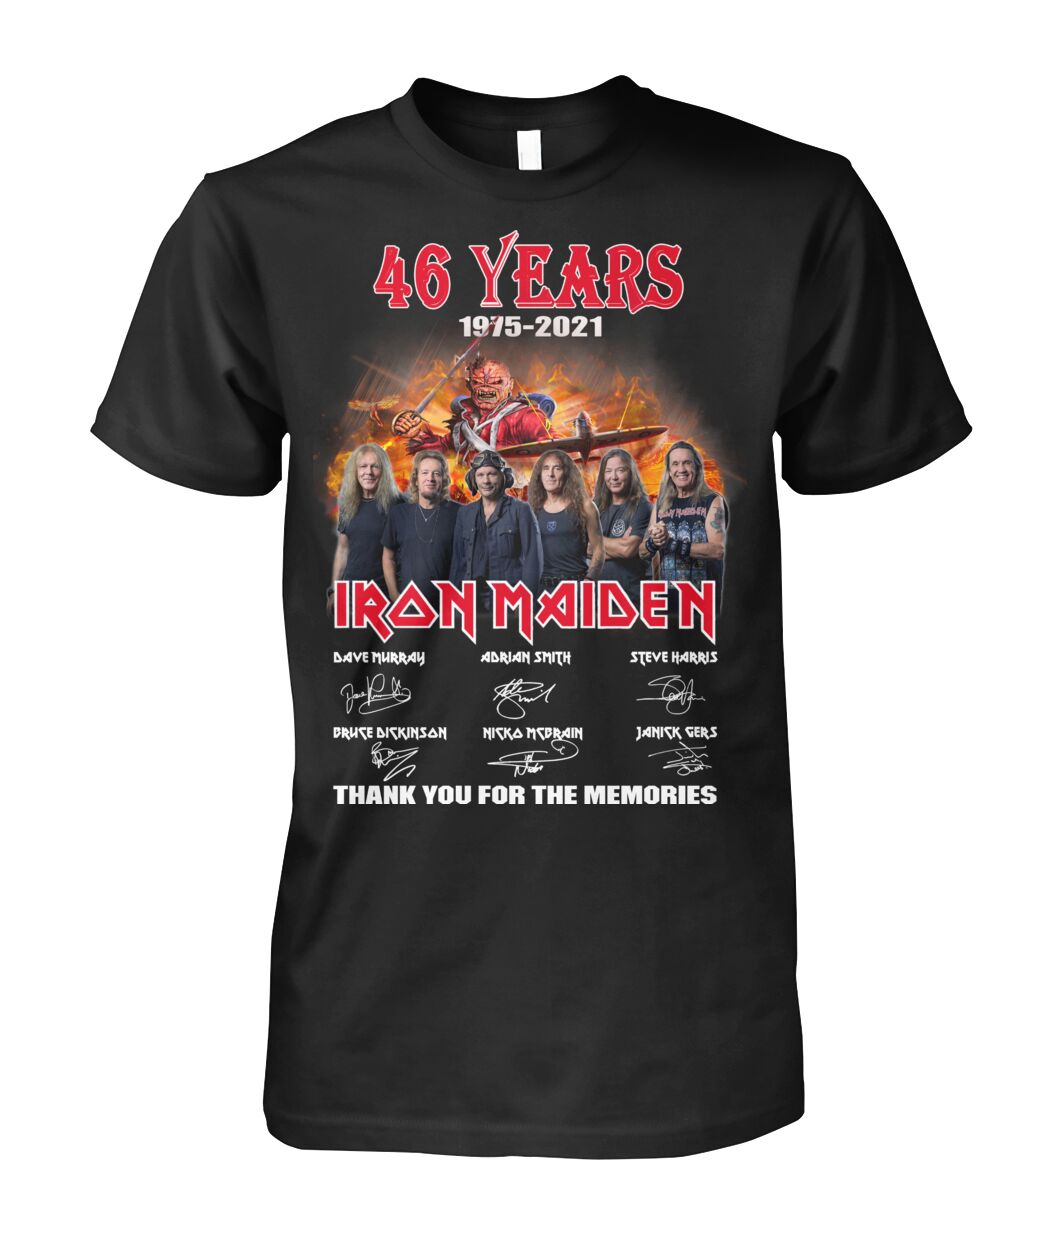 46 years Iron Maiden thank you for the memories shirt, v-neck and sweatshirt